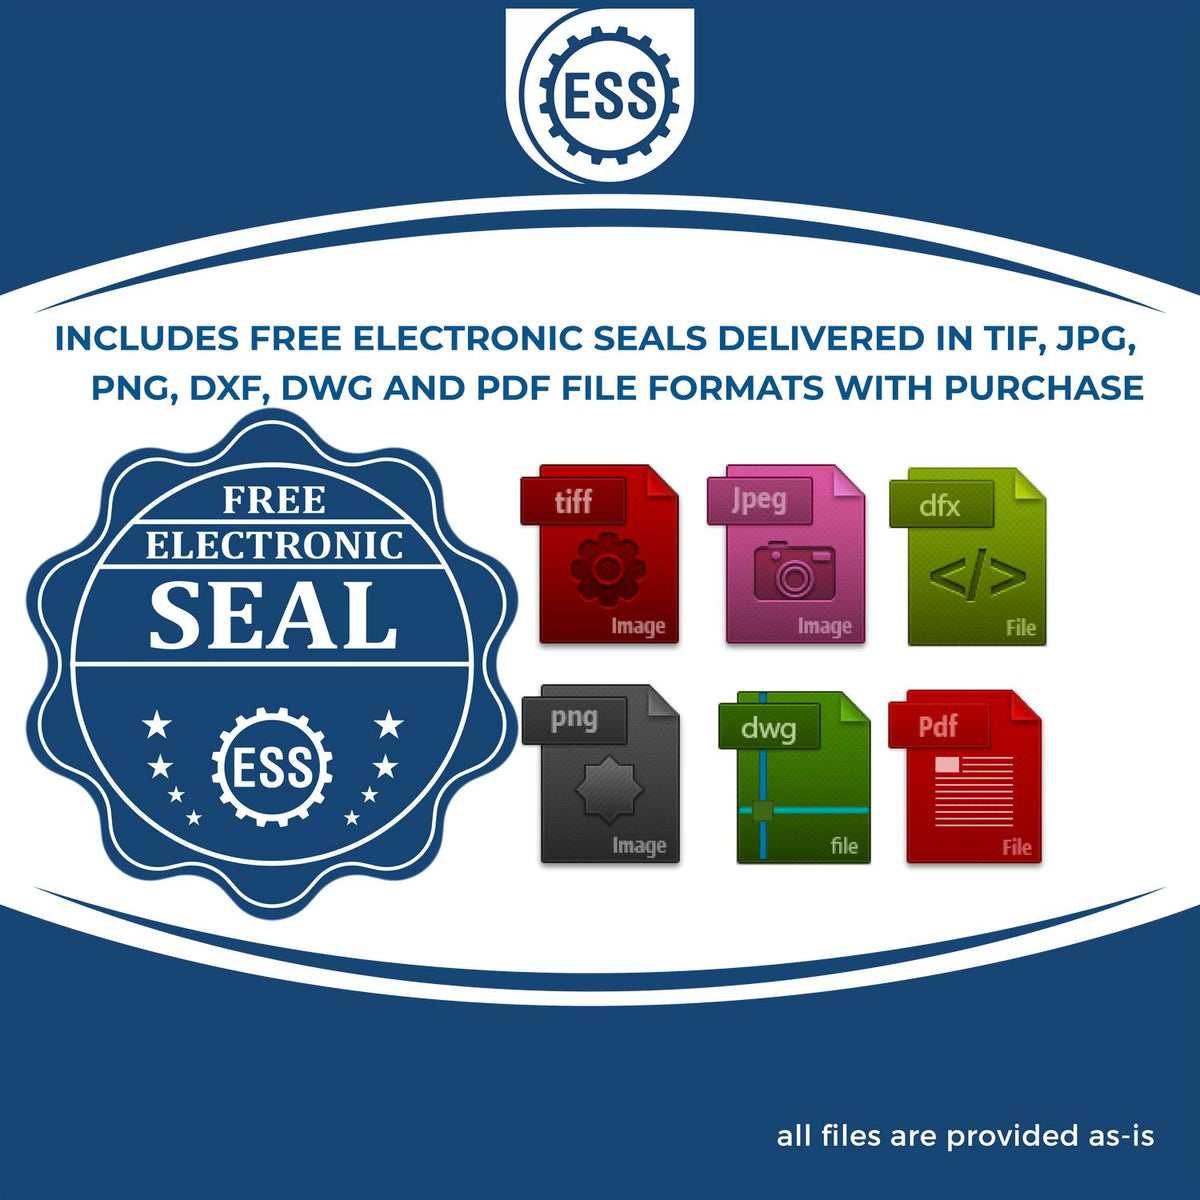 An infographic for the free electronic seal for the Extended Long Reach Louisiana Architect Seal Embosser illustrating the different file type icons such as DXF, DWG, TIF, JPG and PNG.